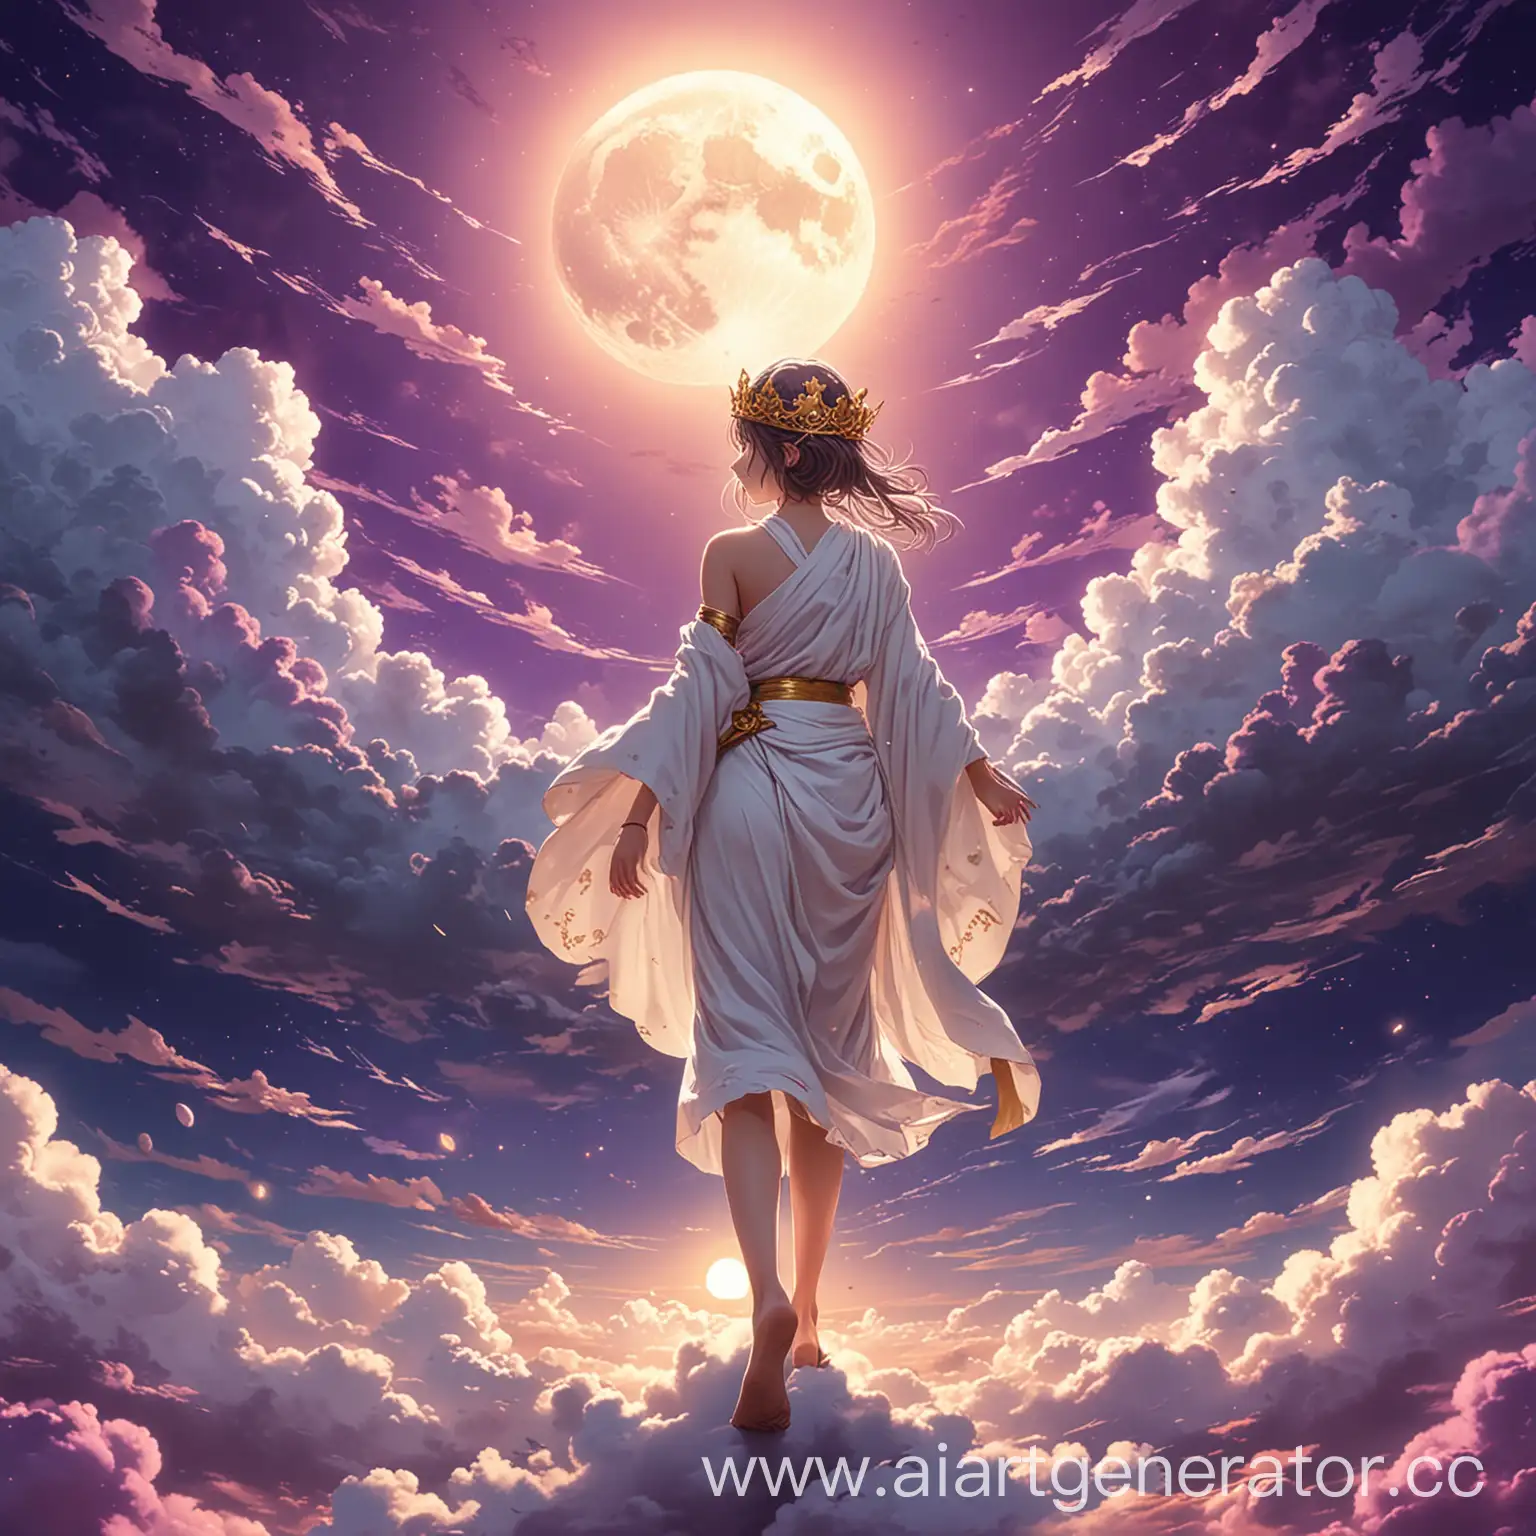 Anime-Girl-in-White-Toga-Walking-on-Clouds-Towards-Golden-Moon